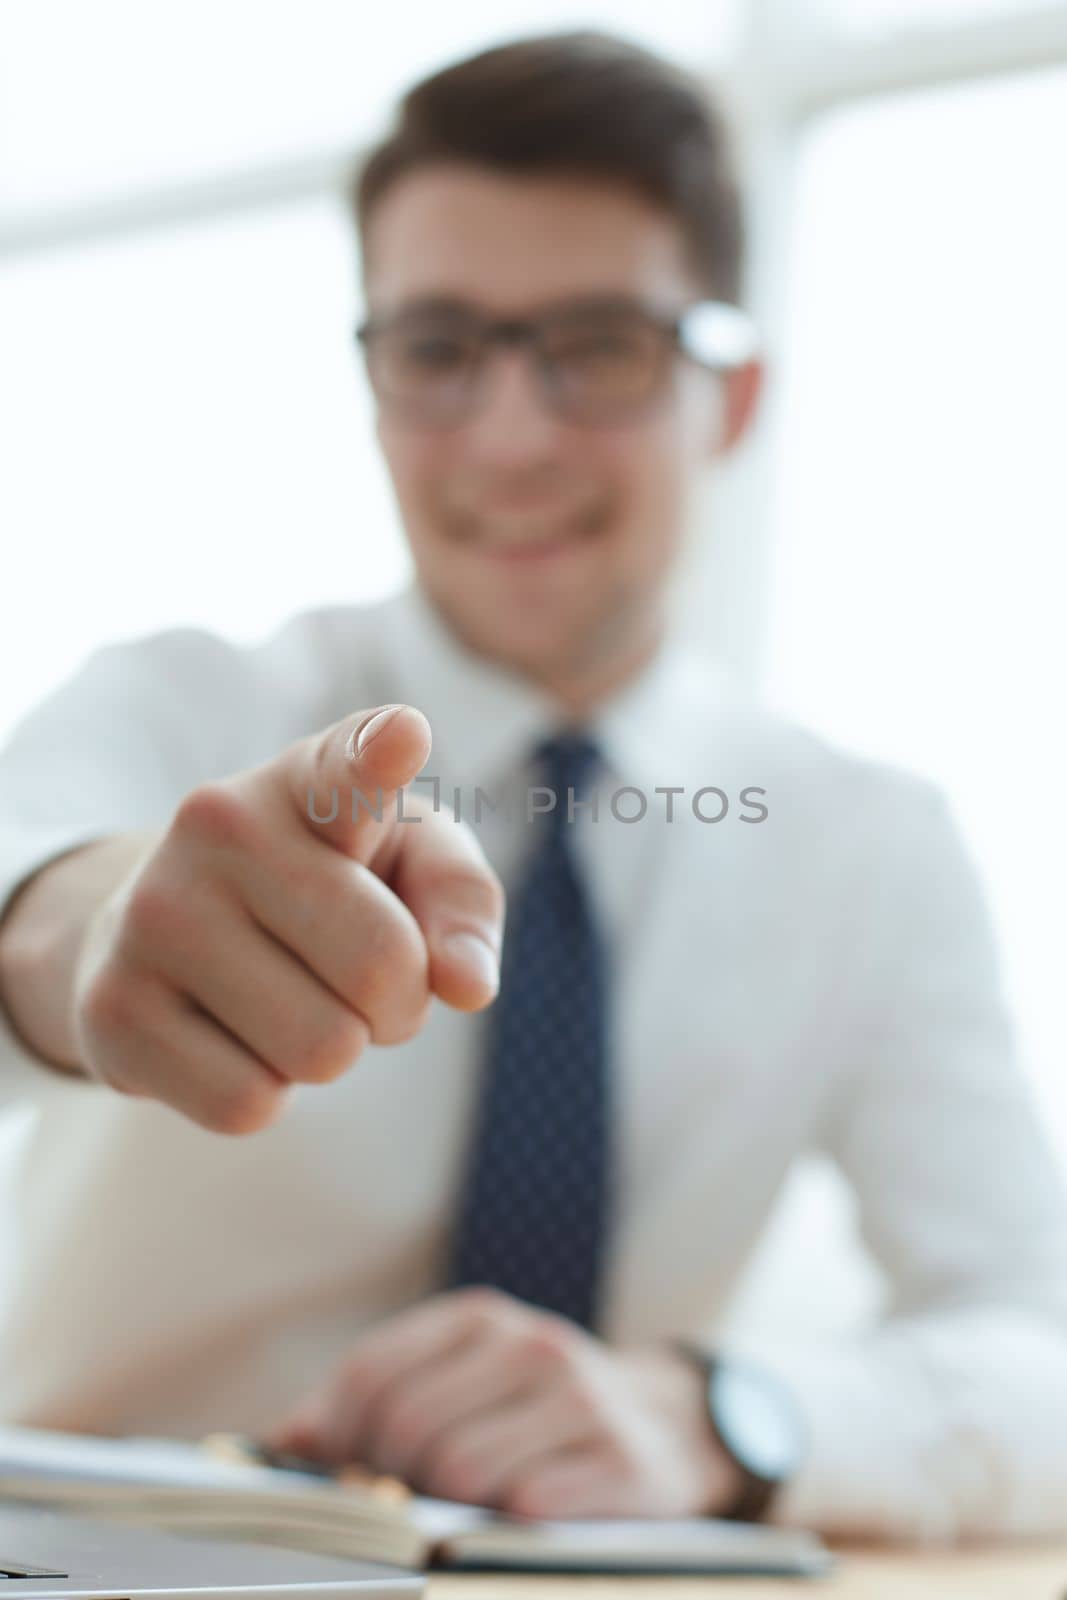 businessman pointing his finger to you at office